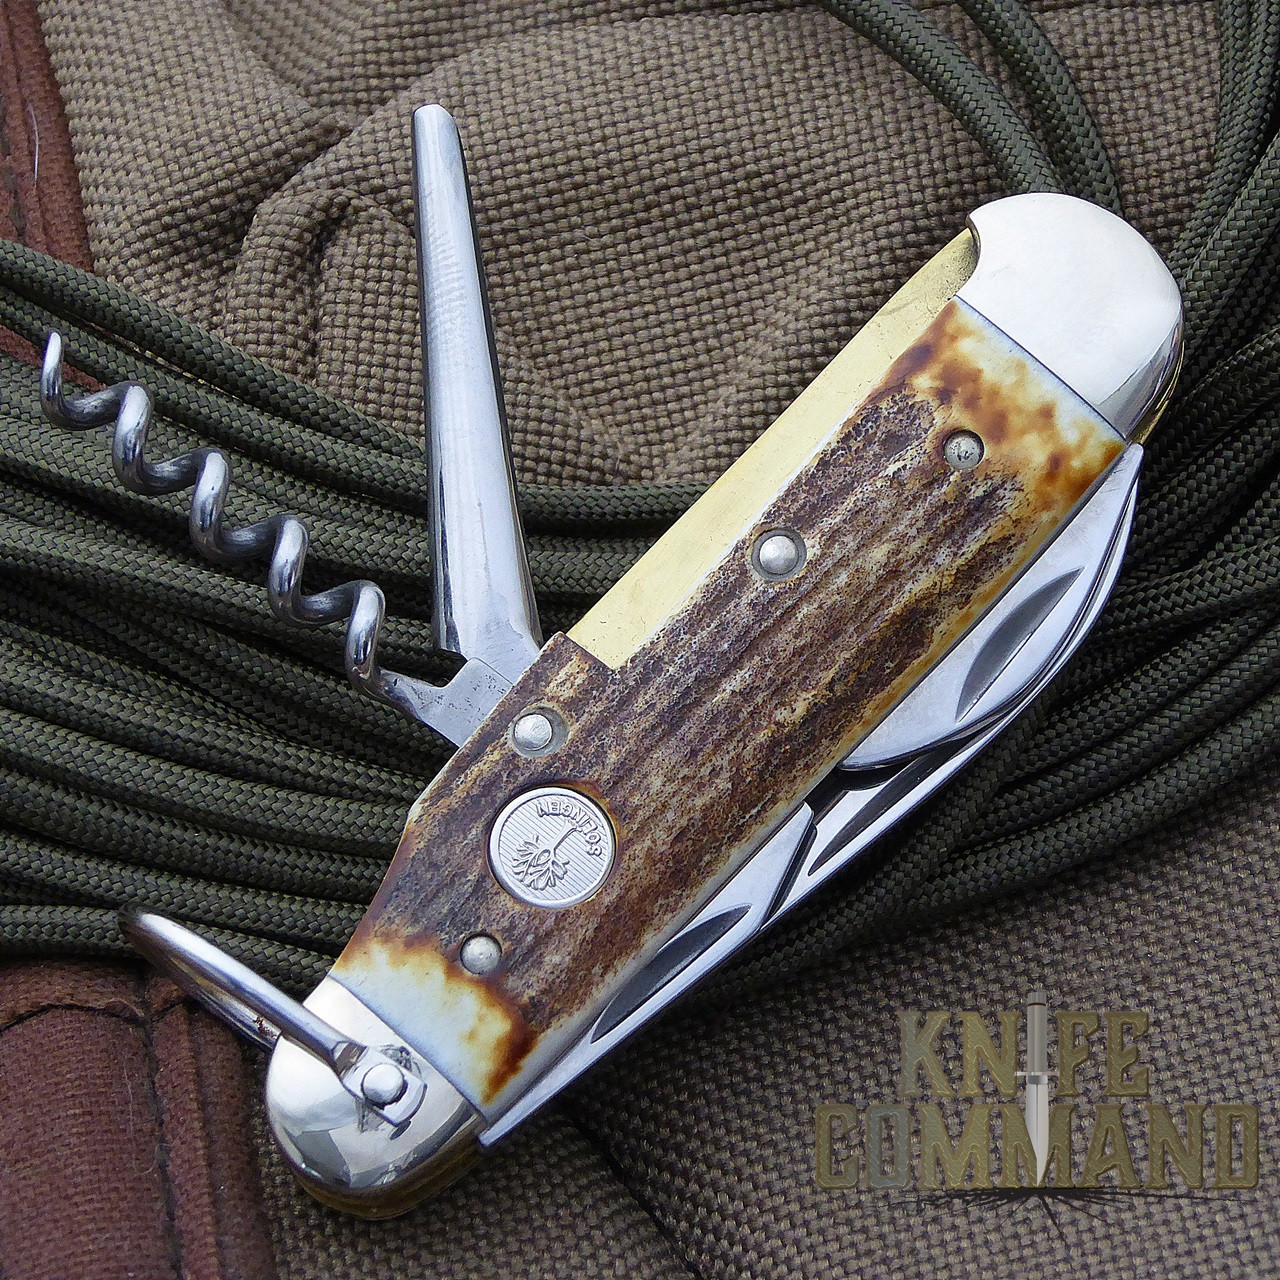 Boker Model 110182HH Camp Stag Scout Knife.   Comes in very handy.